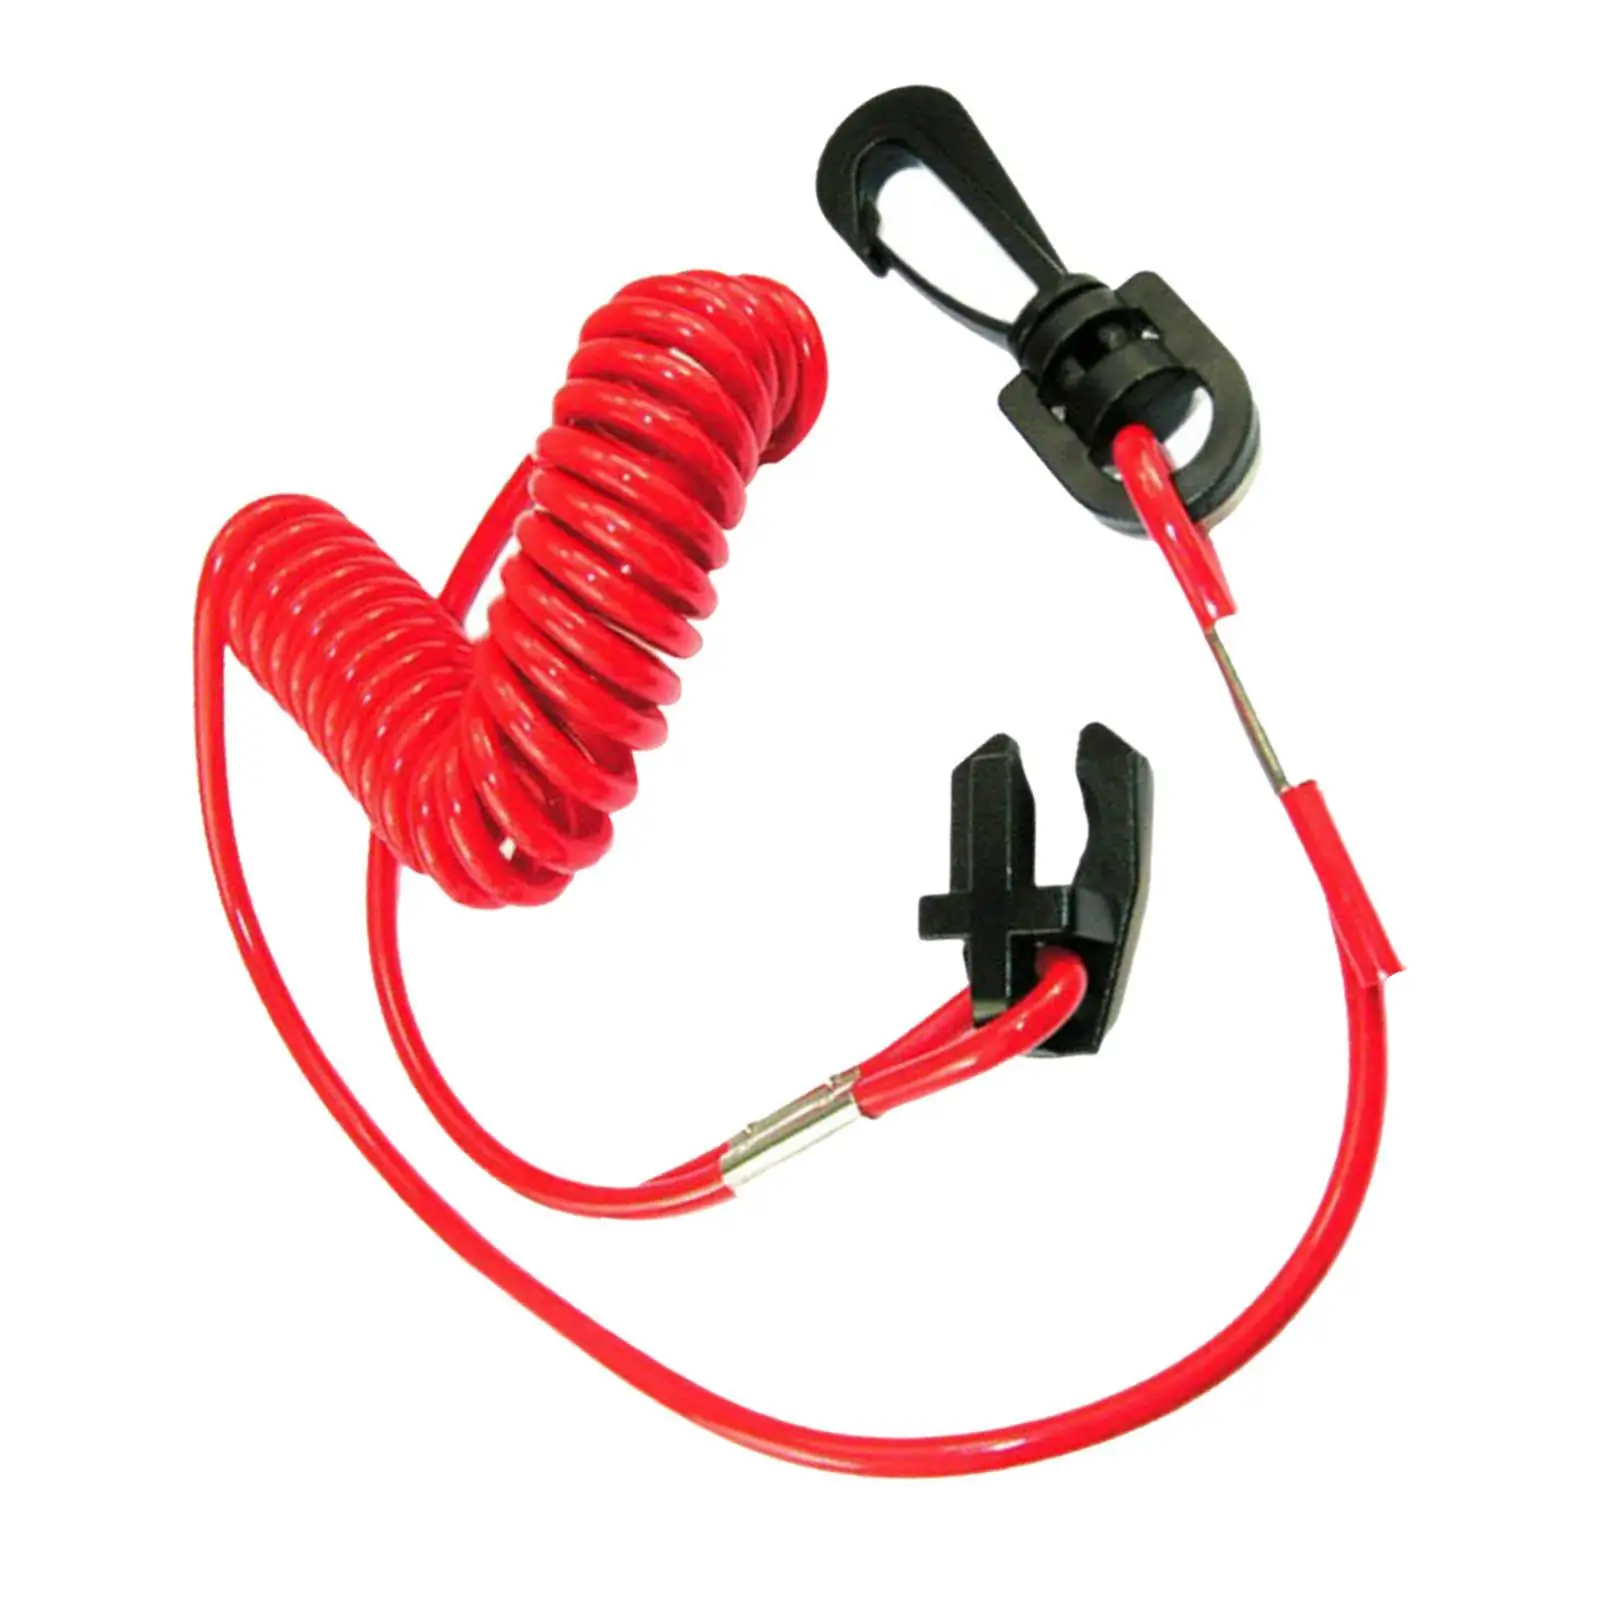 Outboard Engine Motor Safety Kill Stop Switch Lanyard for for Evinrude